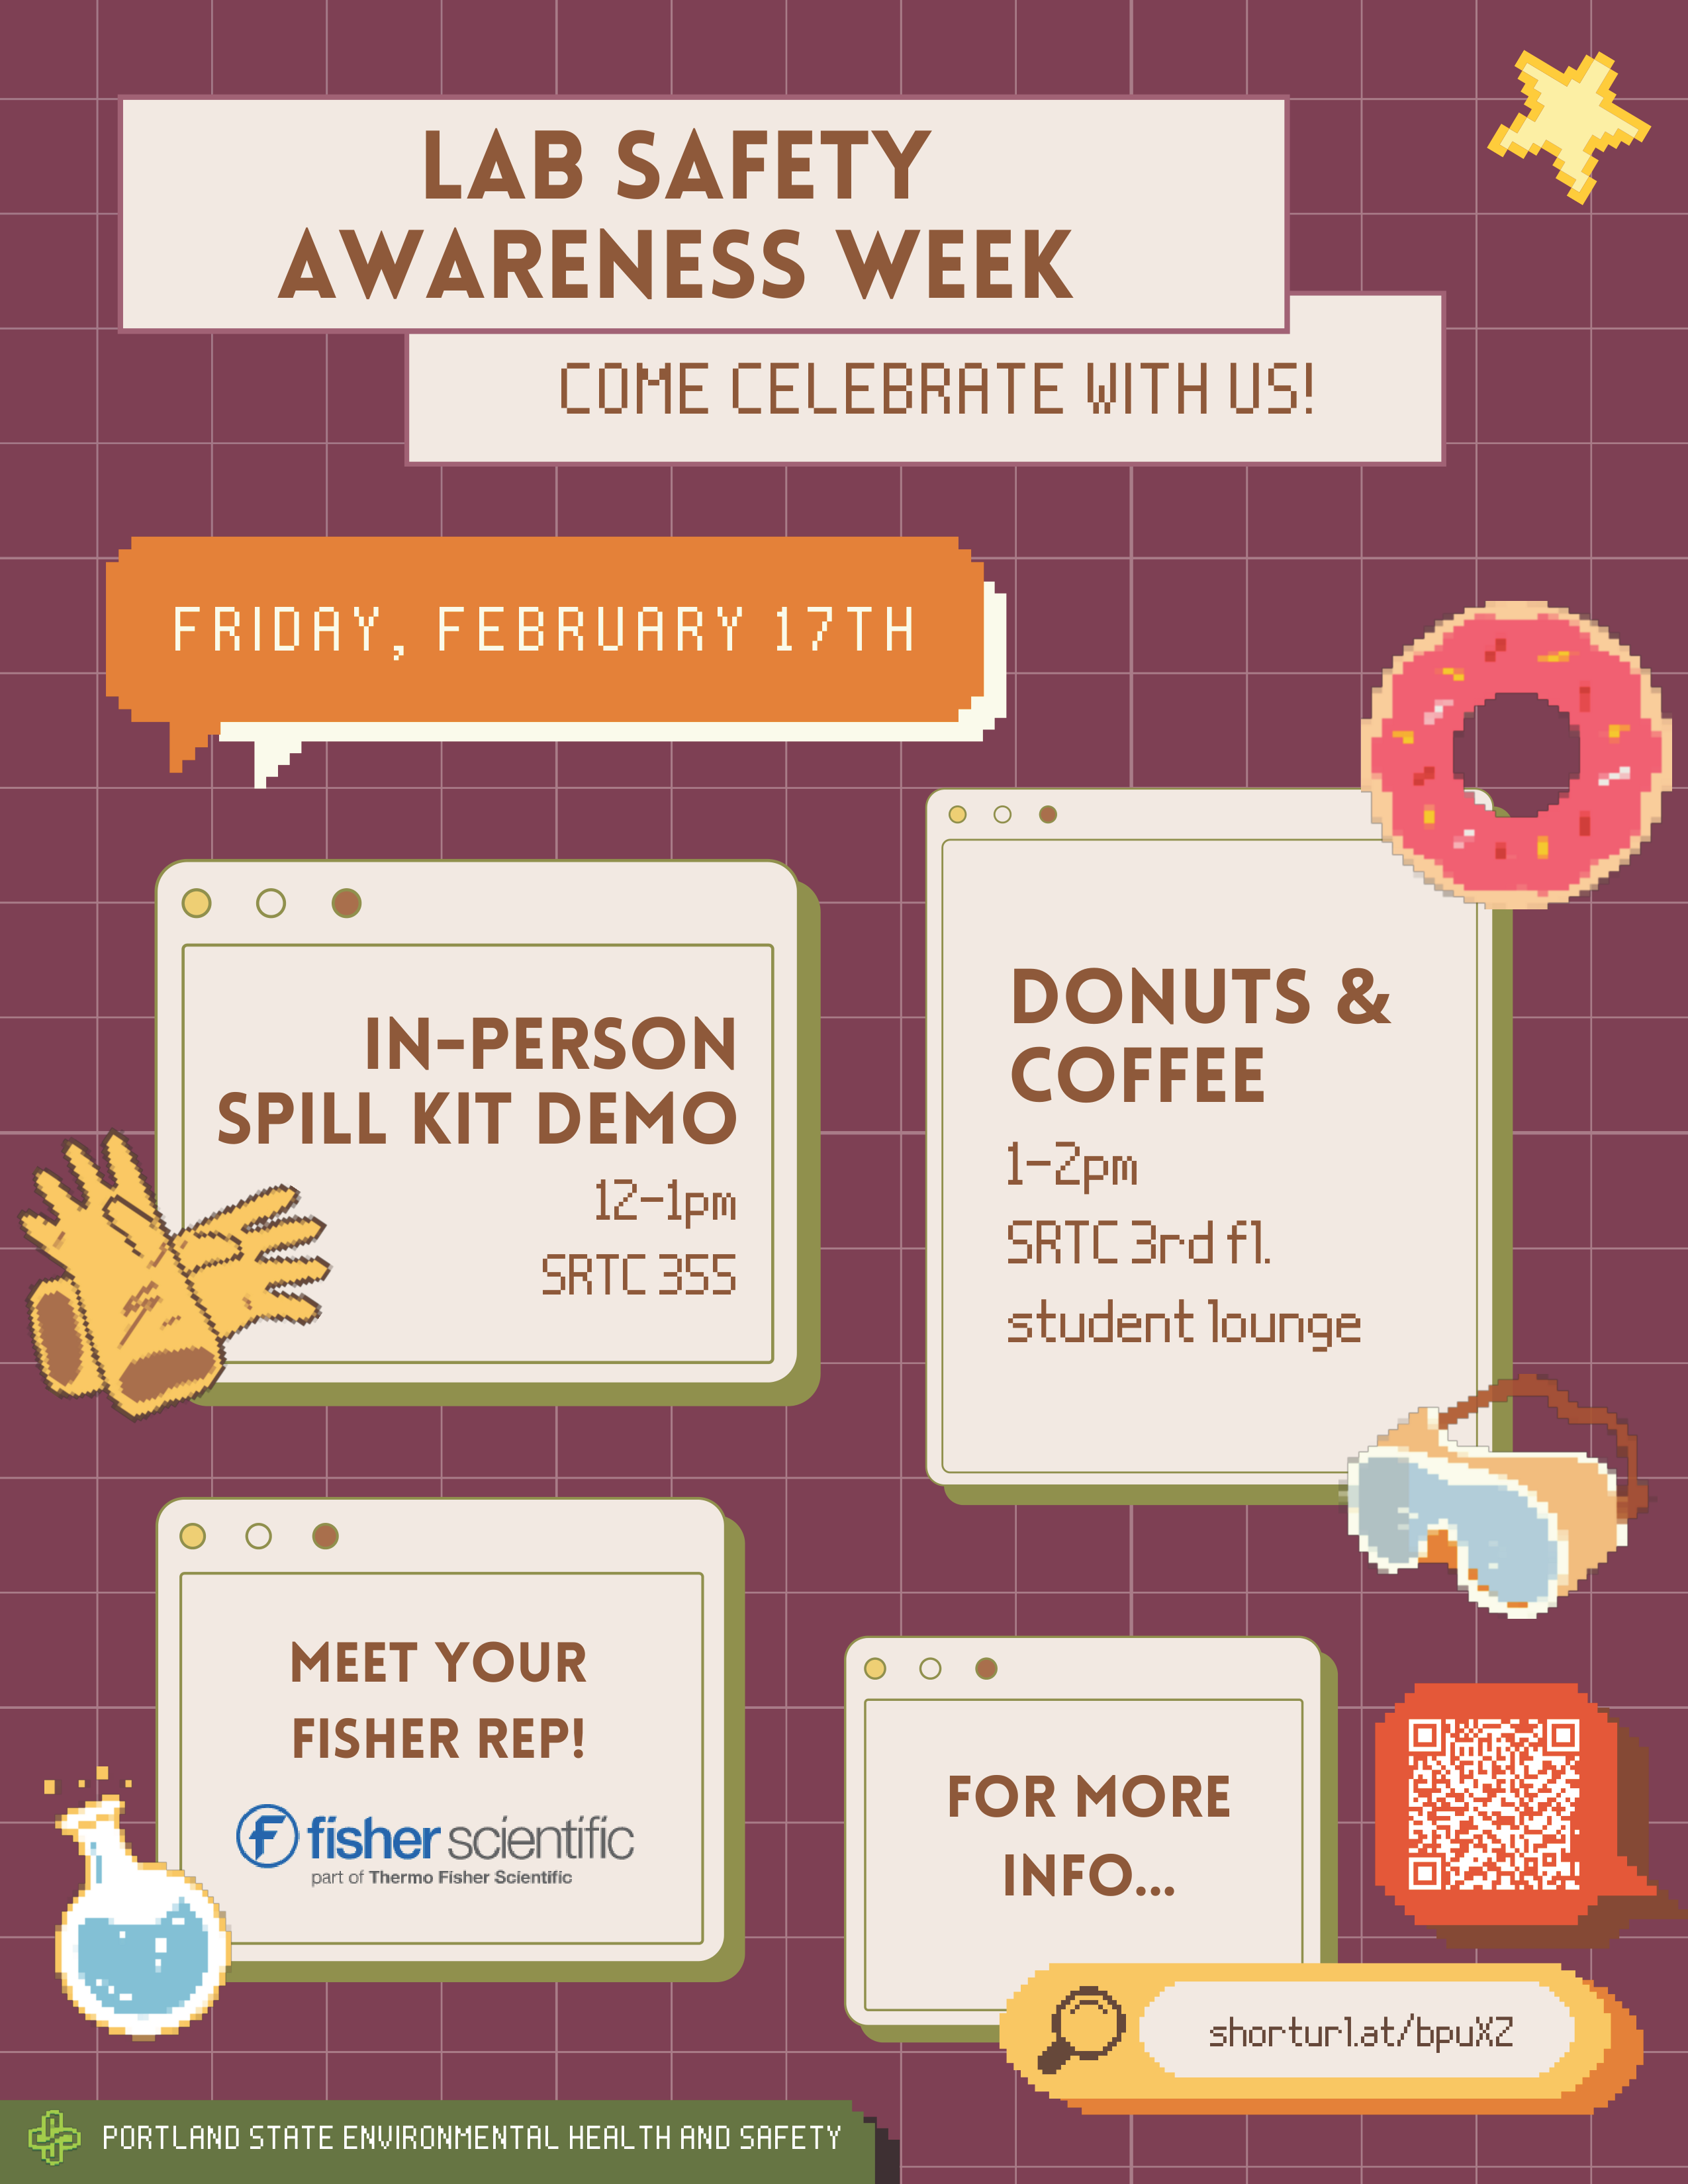 Event information for lab safety awareness week